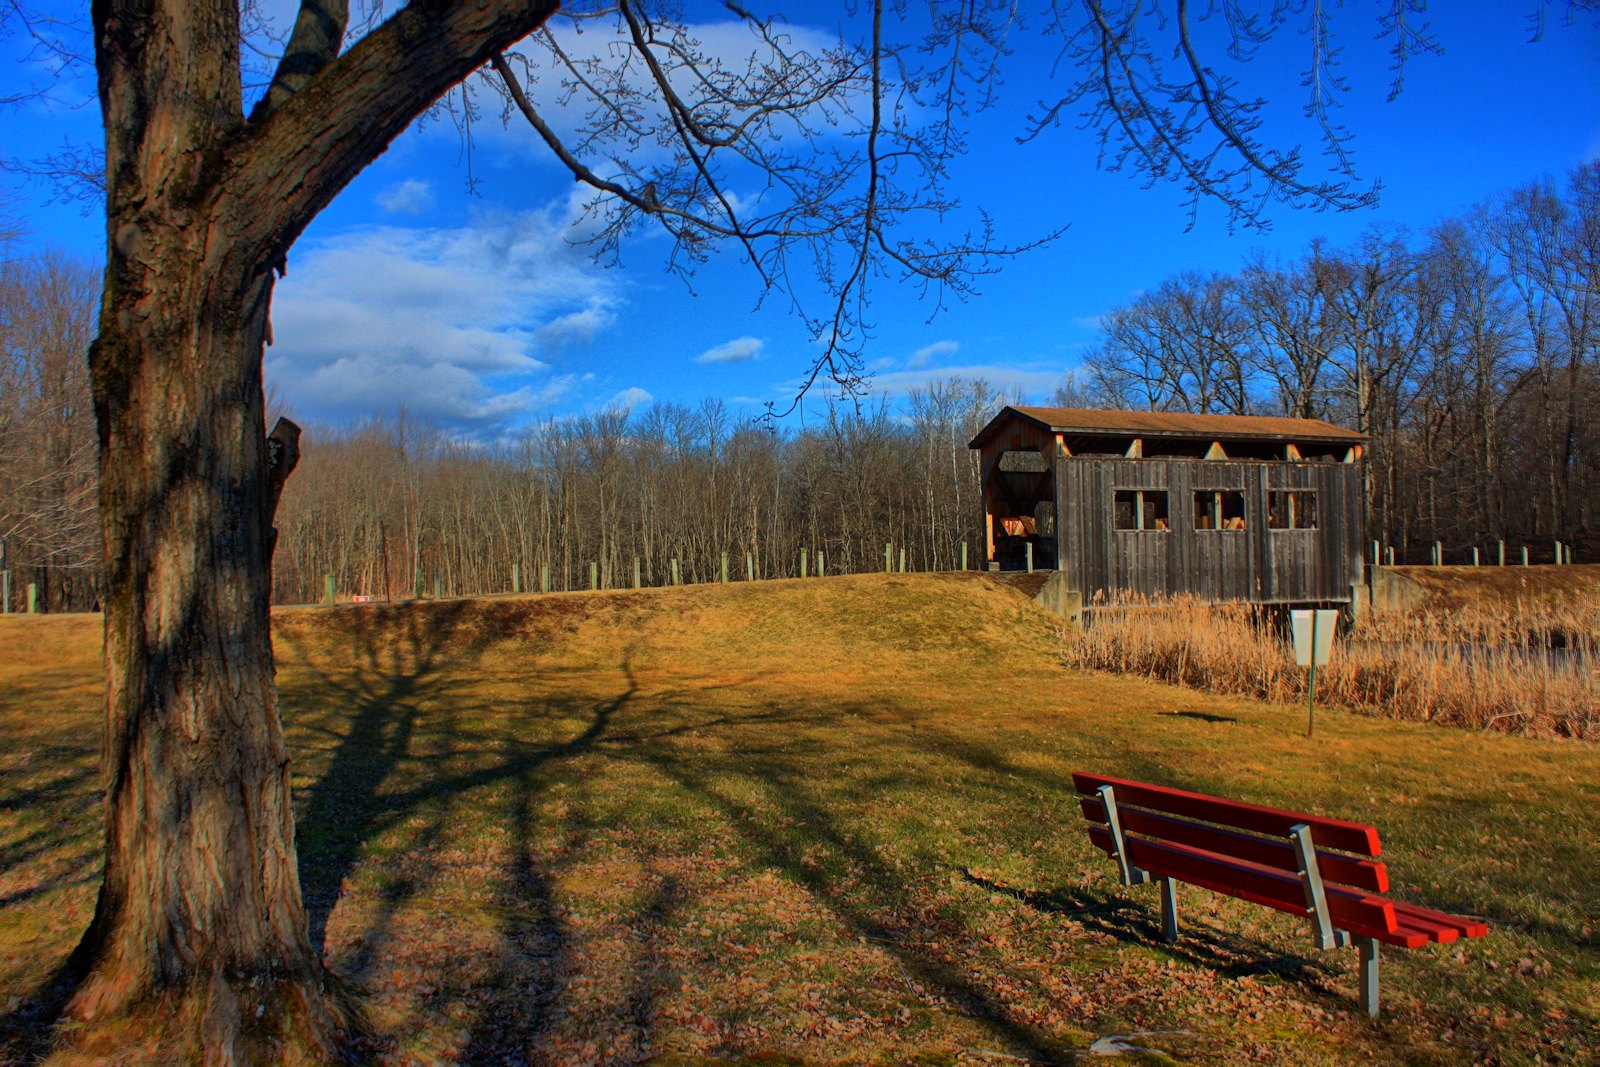 Covered Bridge in HDR<BR>February 3, 2012